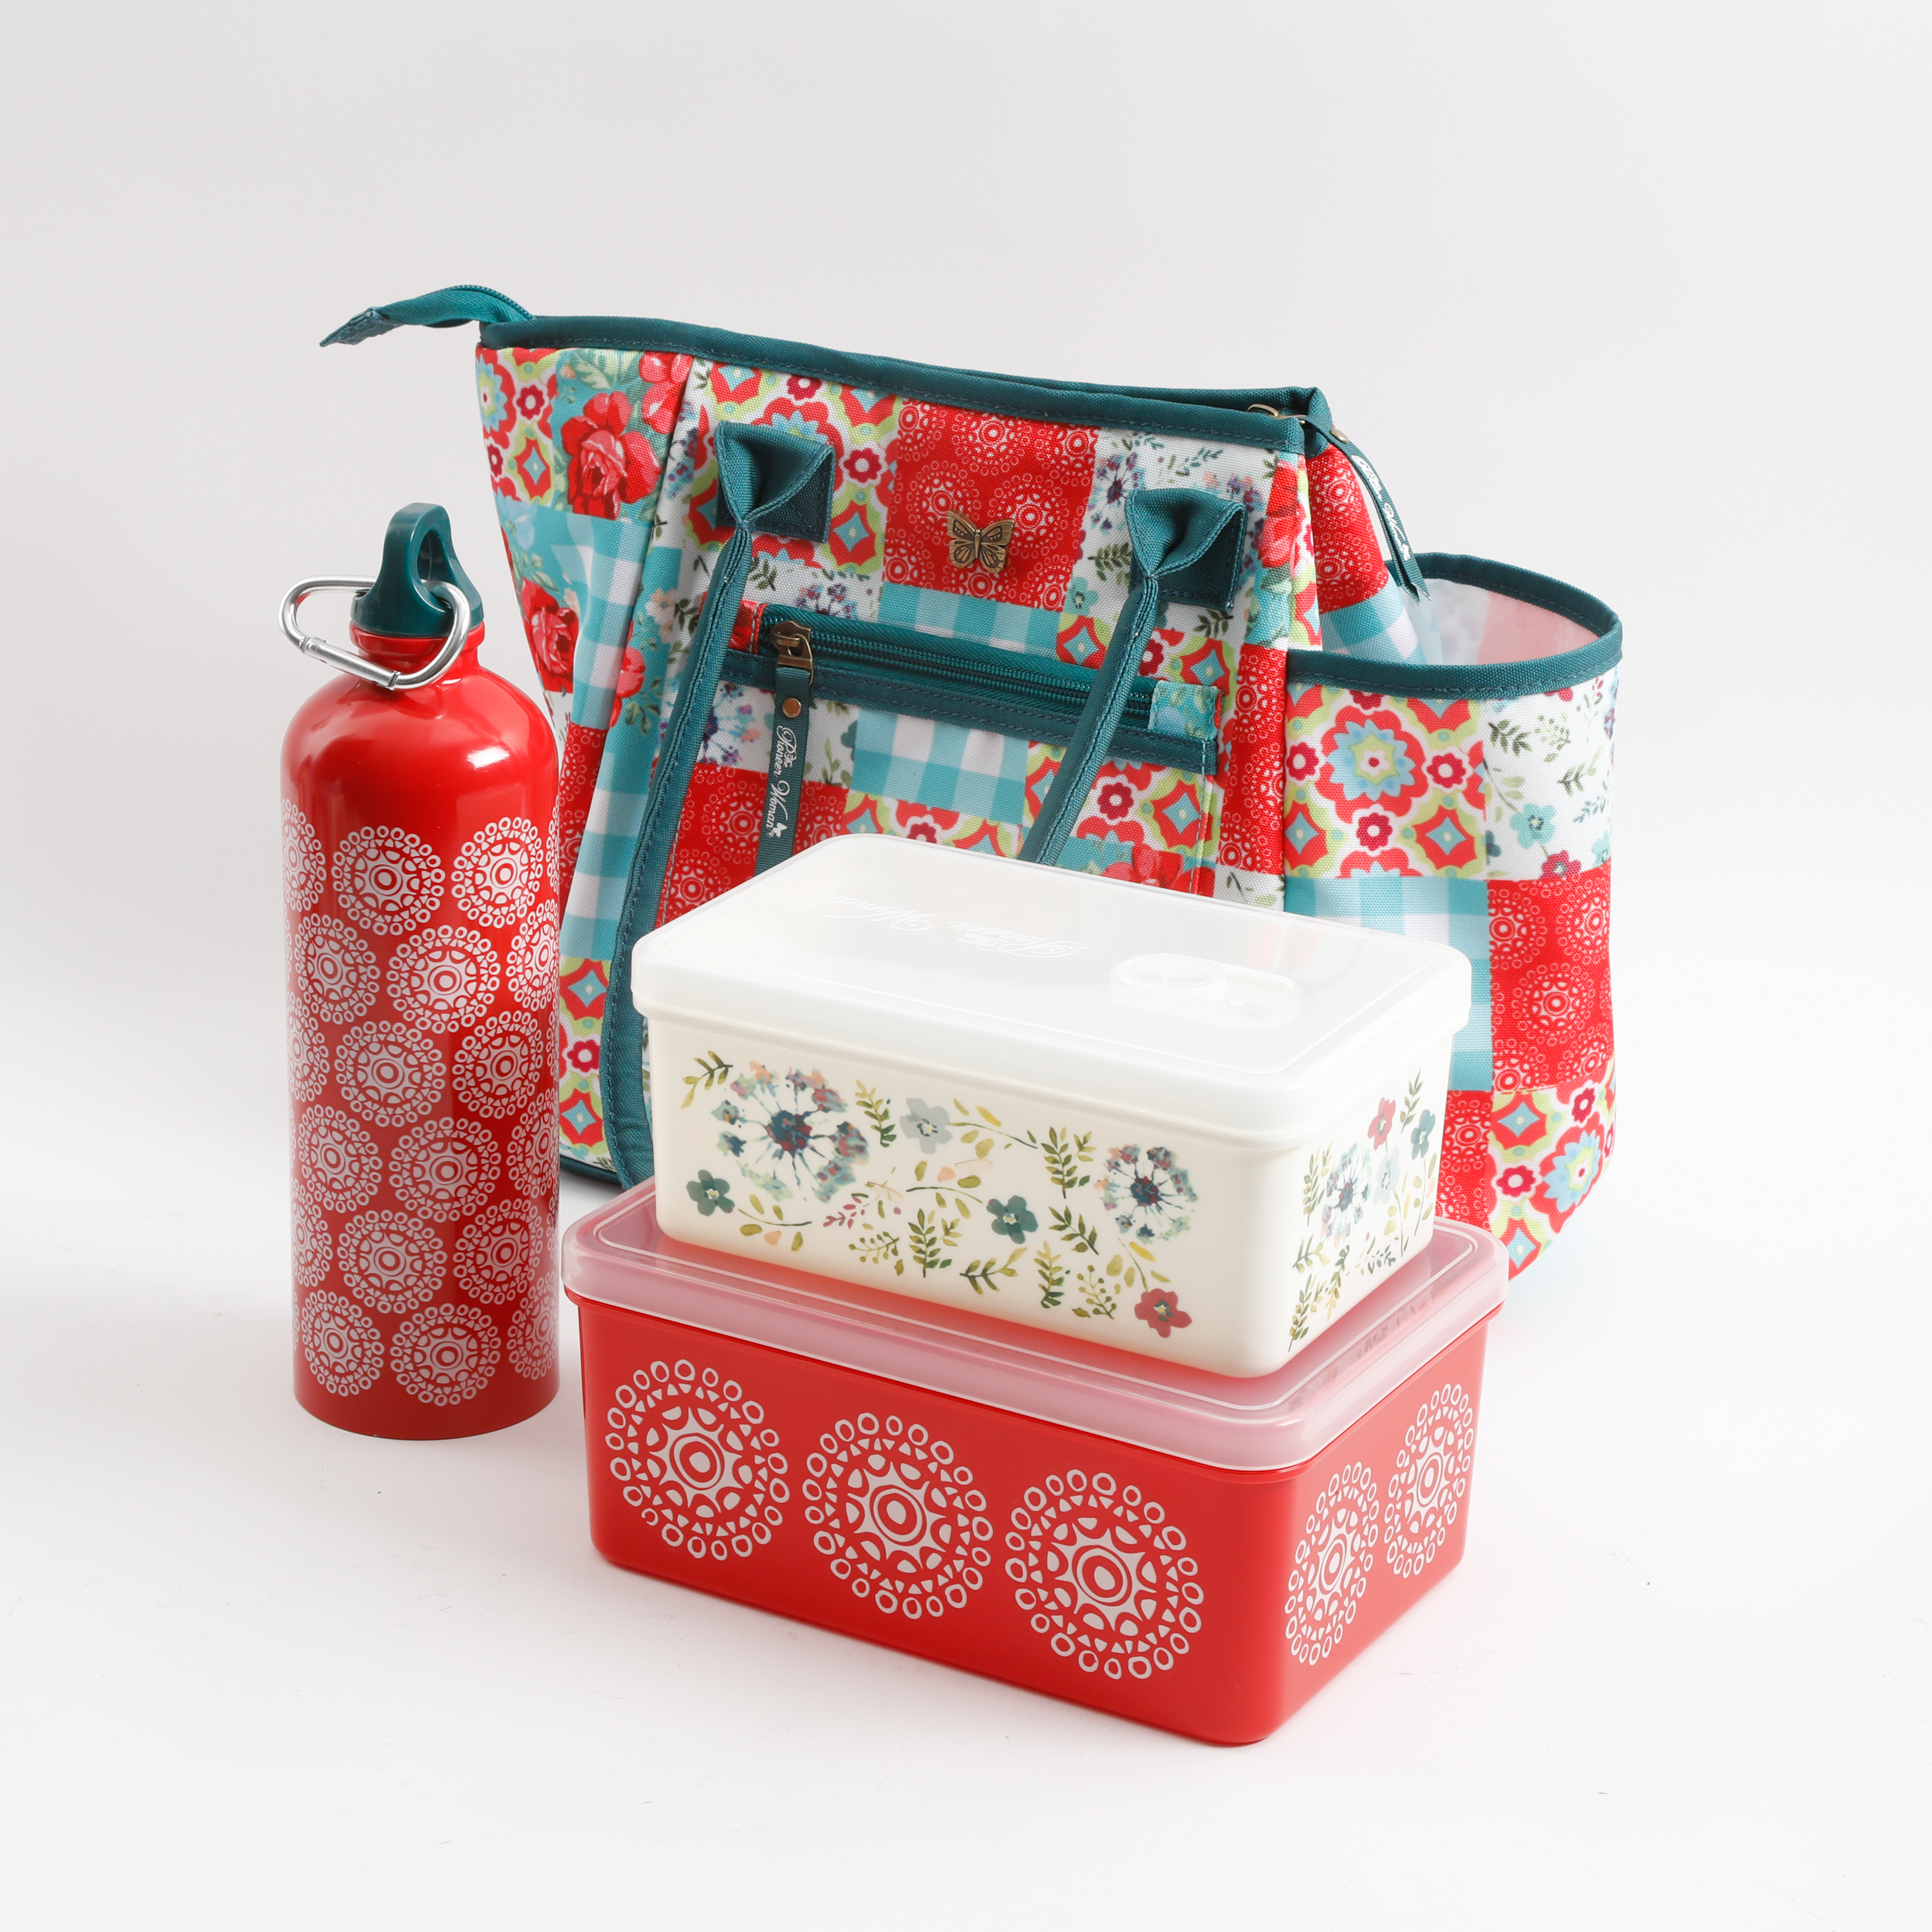 The Pioneer Woman Patchwork 4-Piece Lunch Combo Set - image 2 of 6